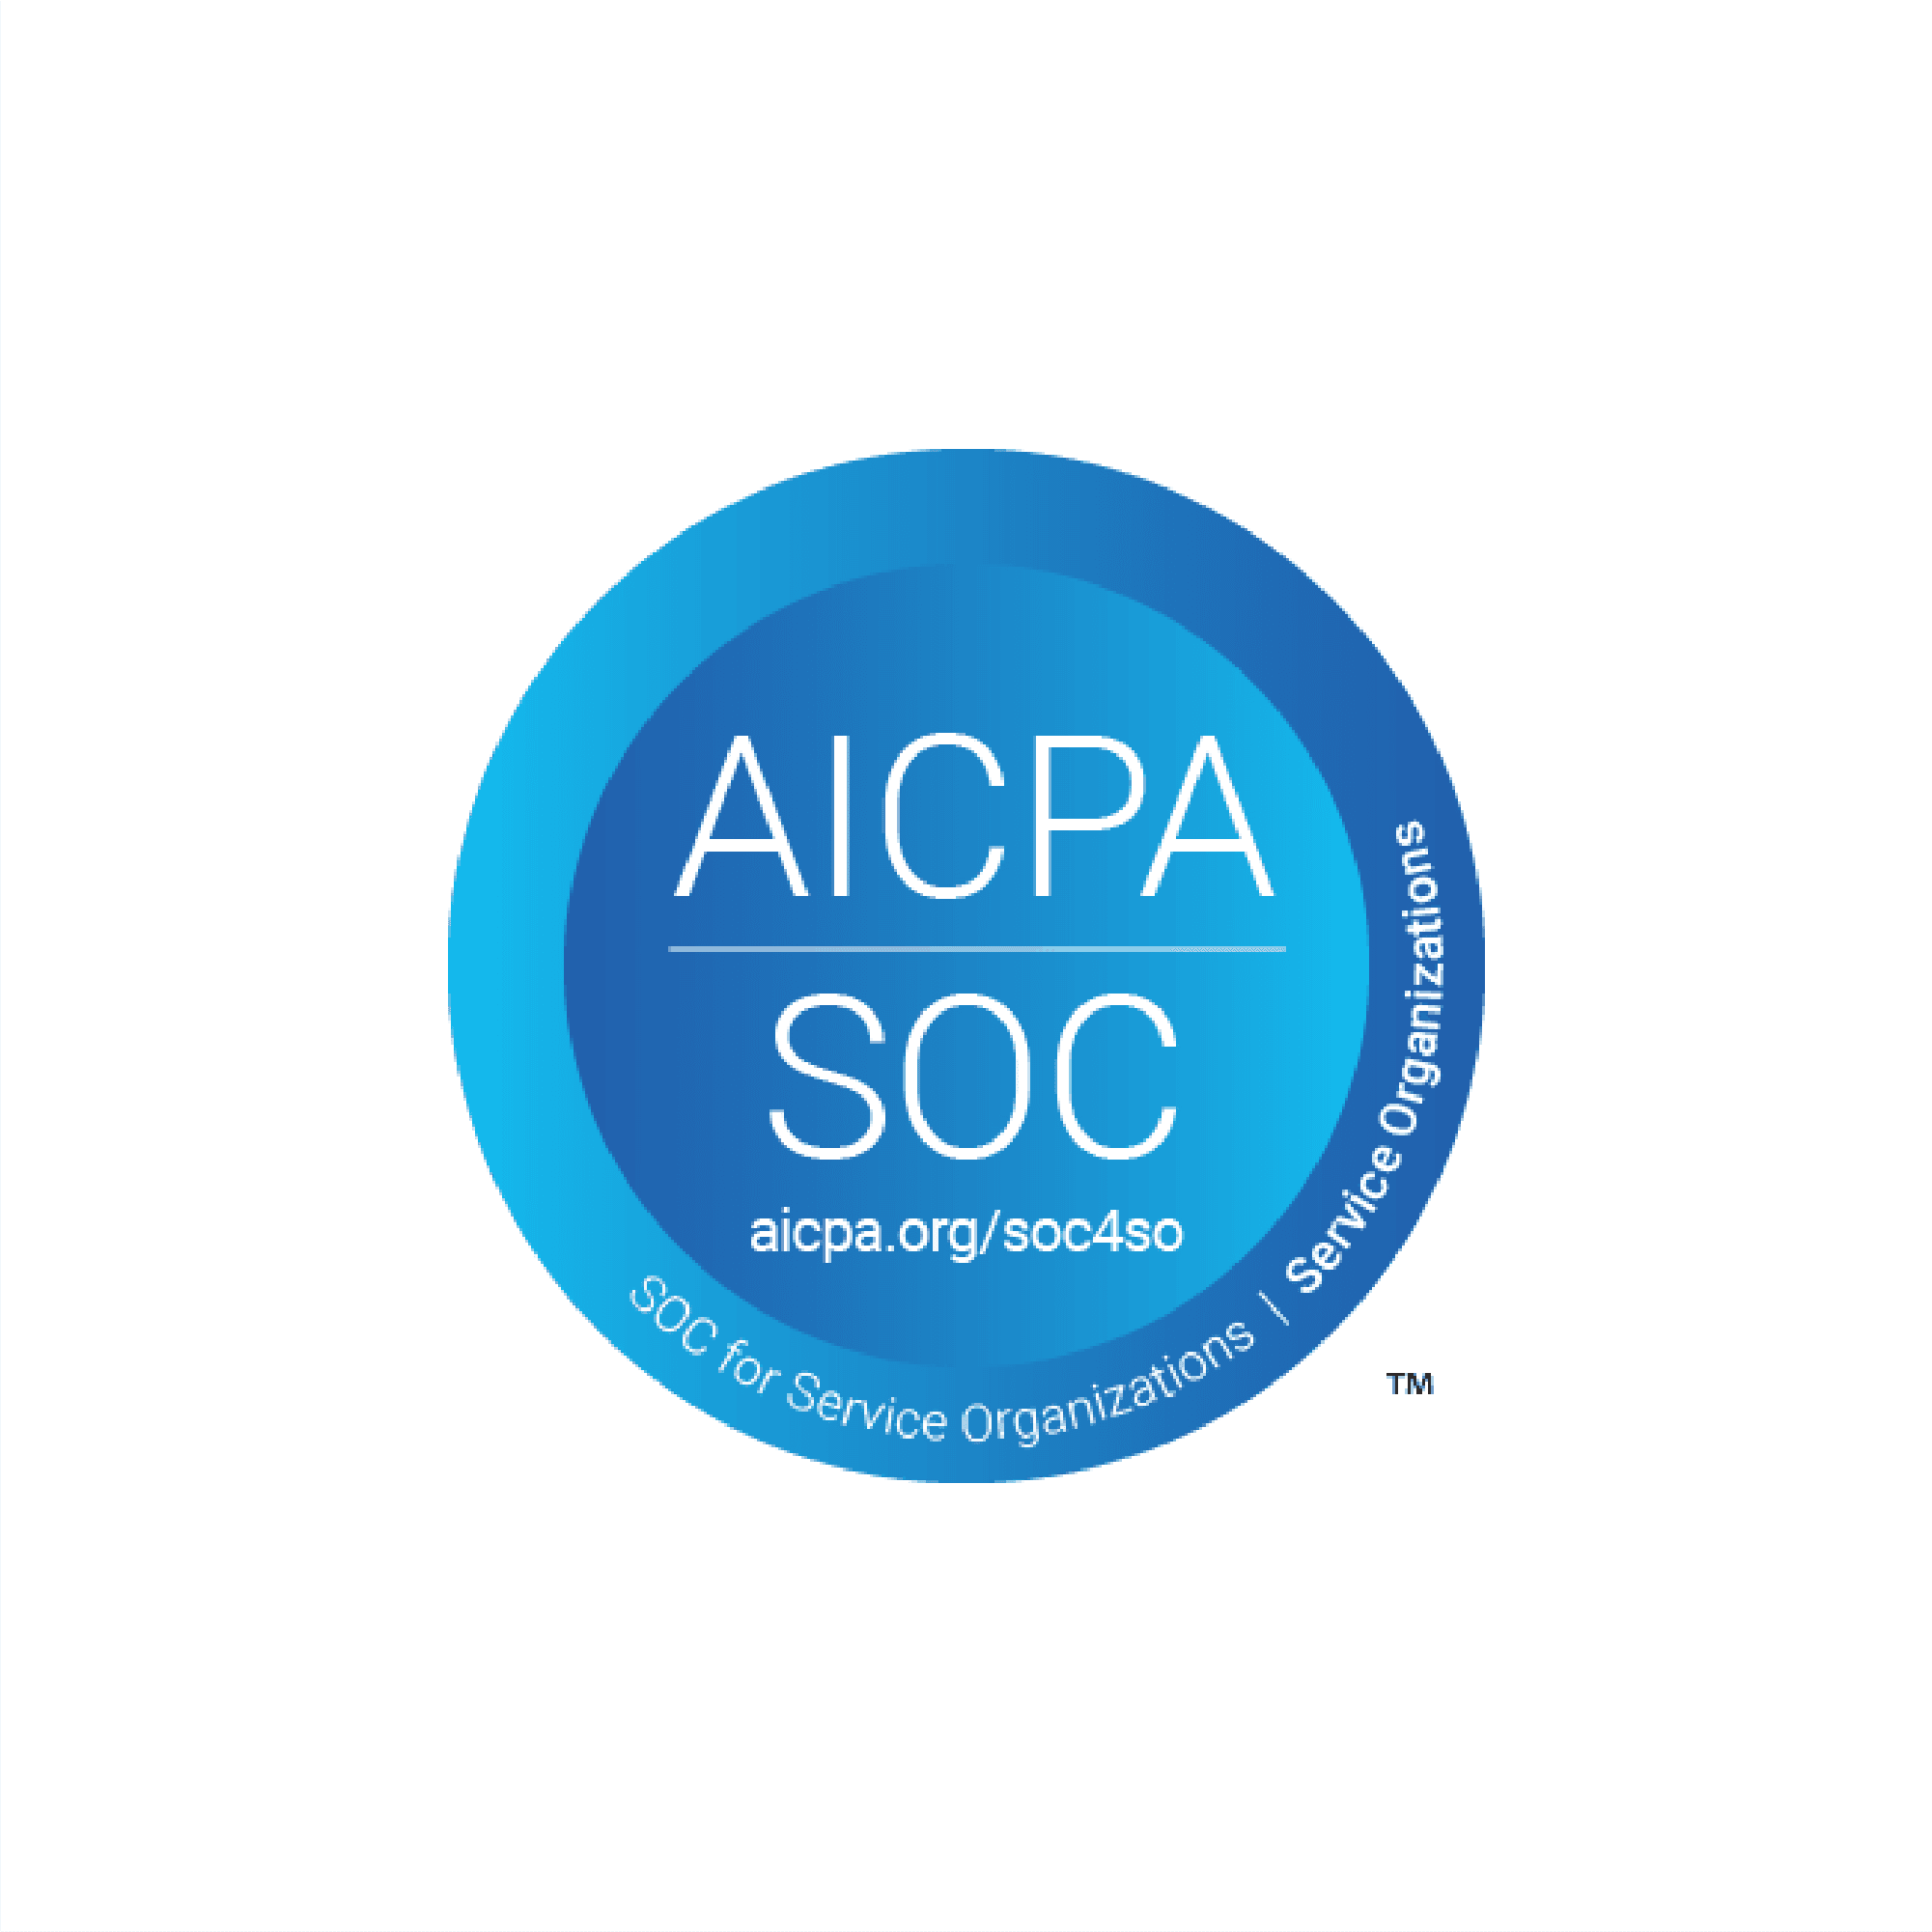 Systems and Organizations Controls 2 Badge. Text reads: AICPA/SOC aicpa.org/soc4so. SOC for Service Organizations.